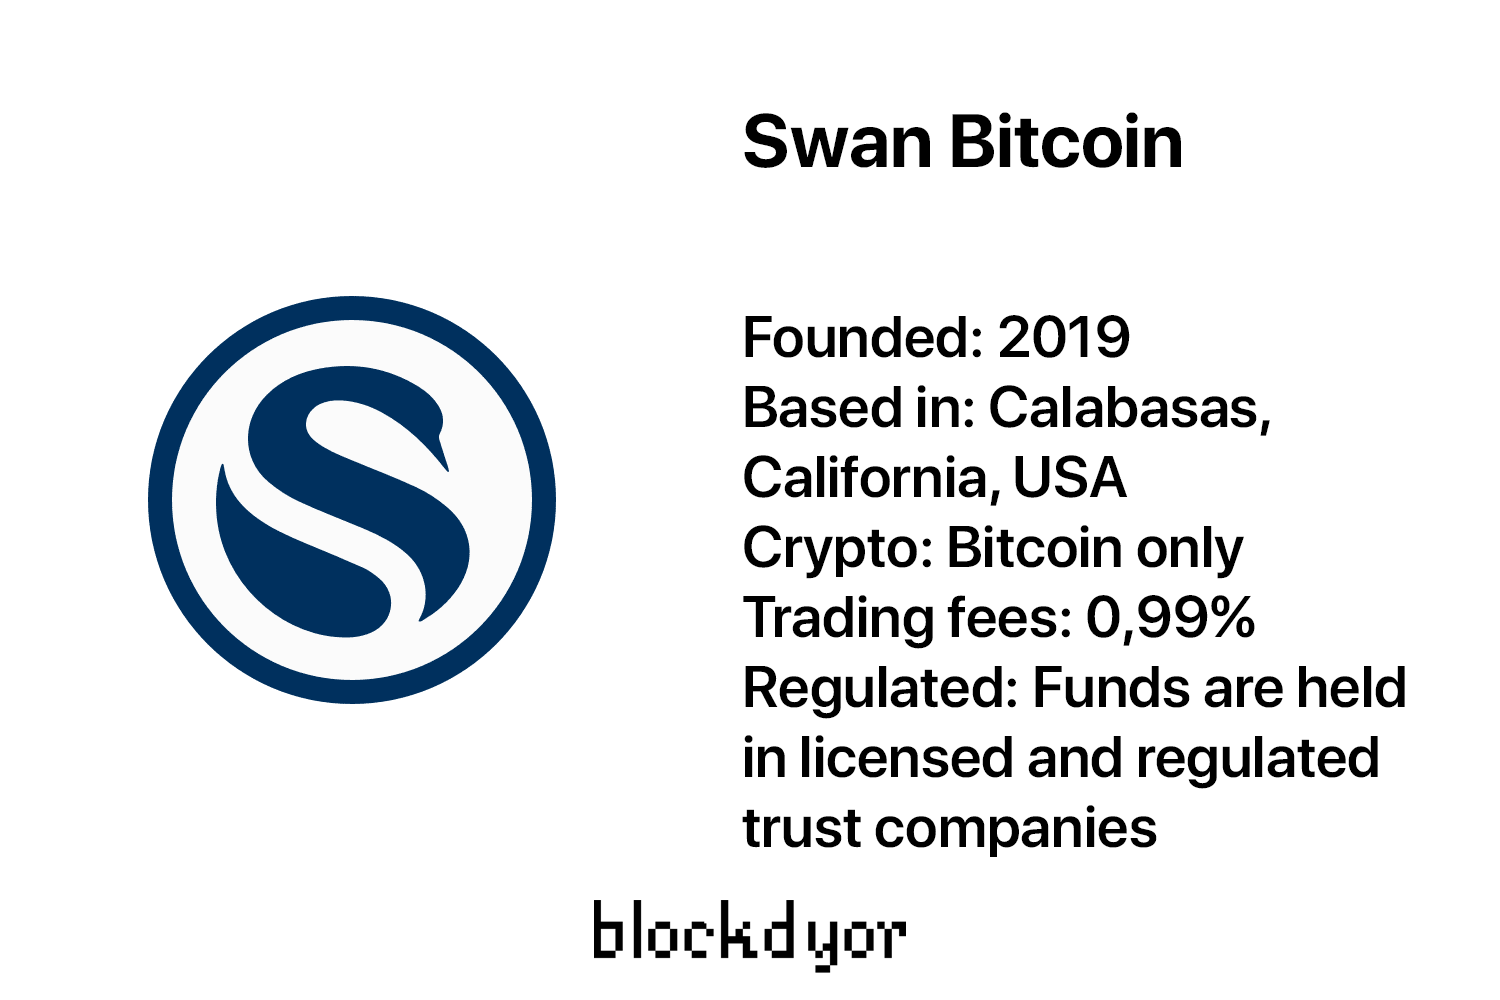 Swan Bitcoin Overview